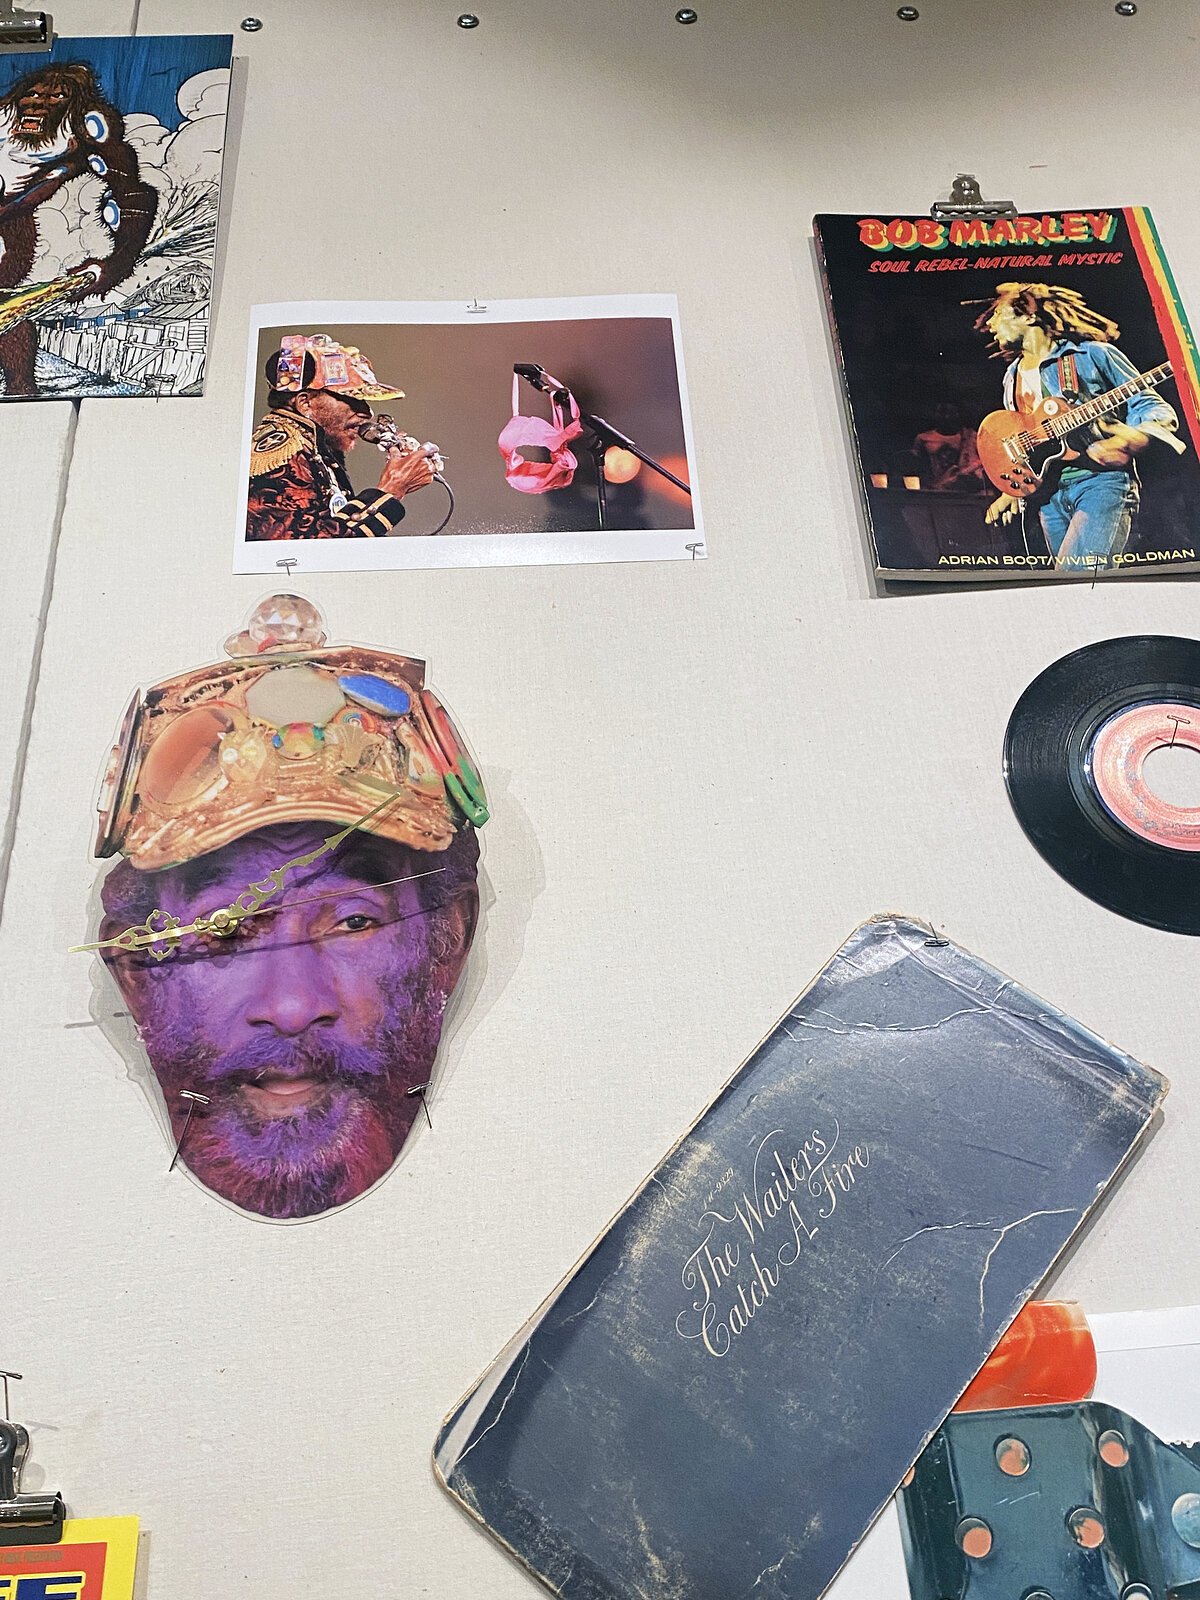 Lee Scratch Perry, The Main Event Exhibition, NYC 2021